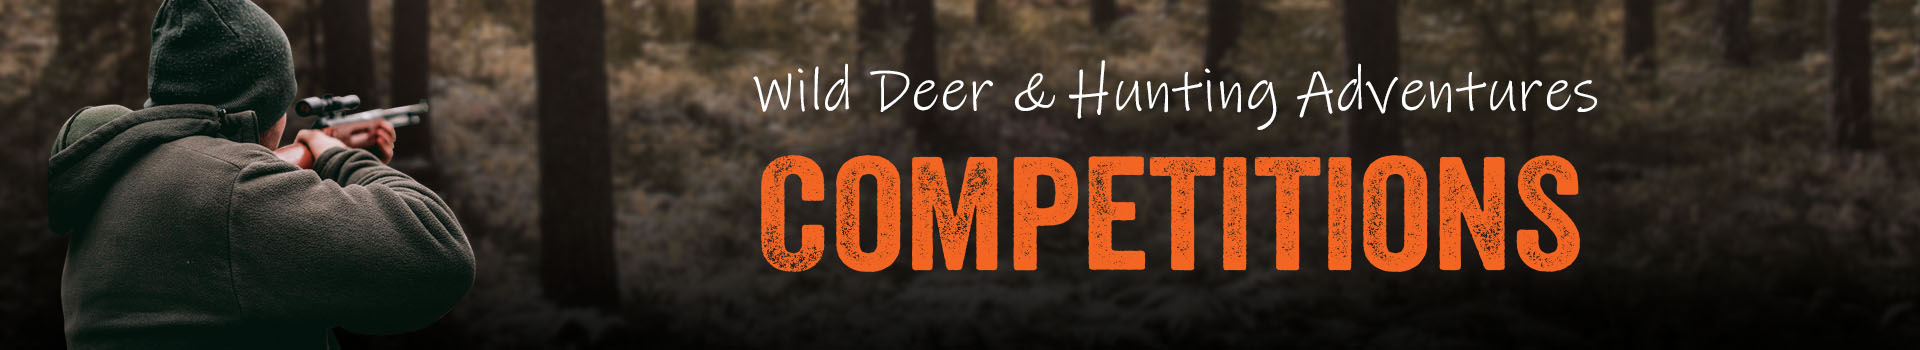 Wild Deer Competitions